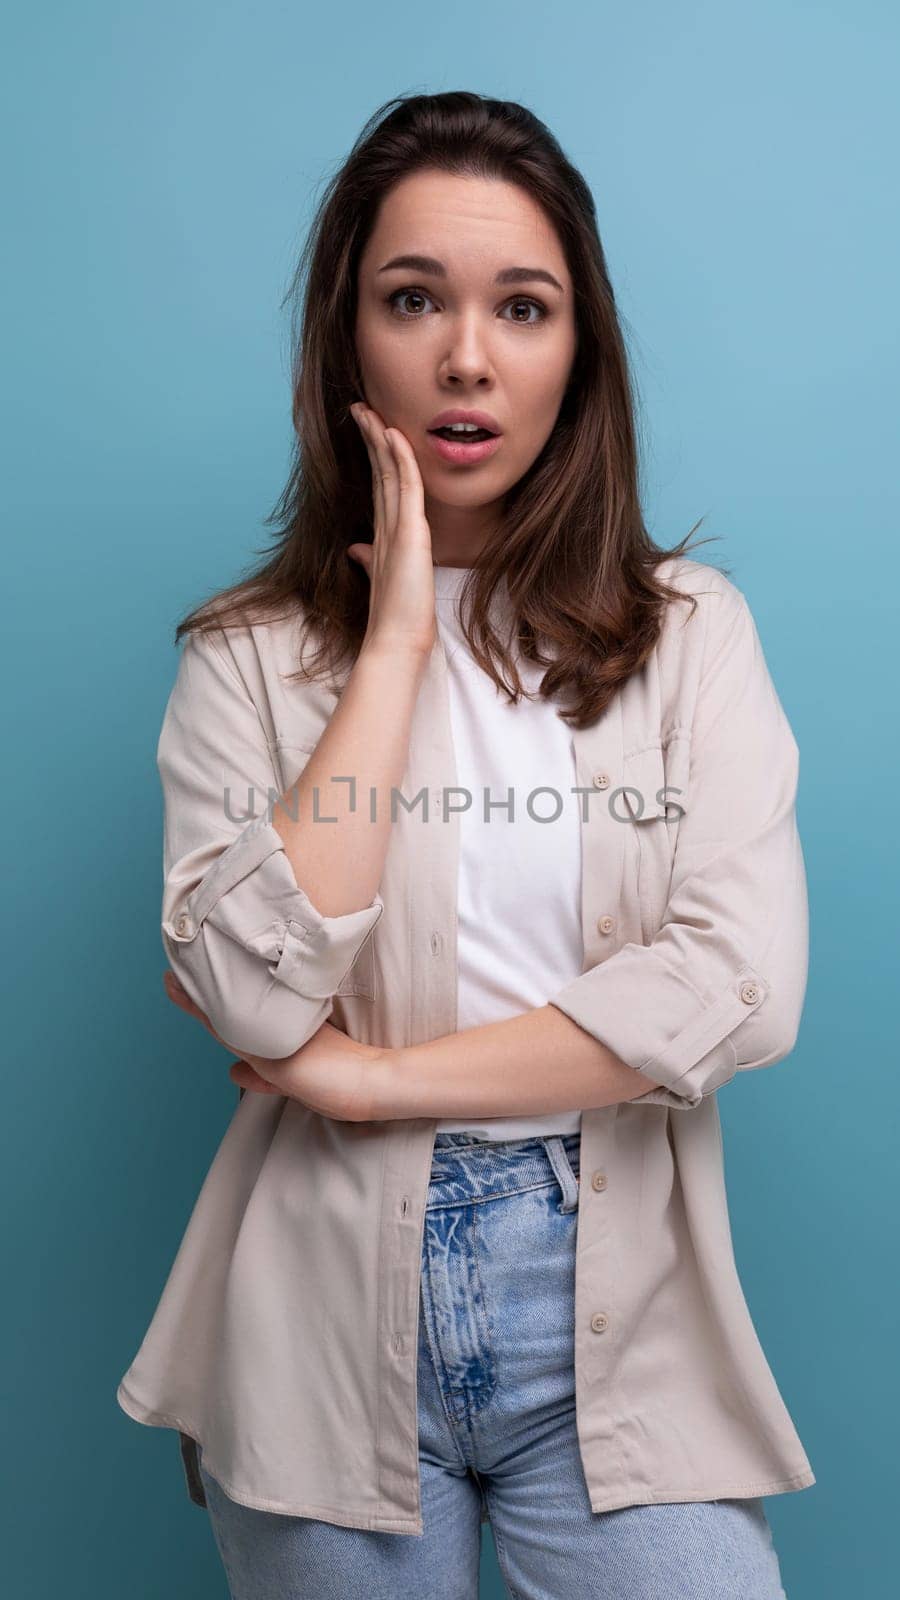 distressed brunette 30 year old female person dressed in shirt and jeans looking at camera on blue background.